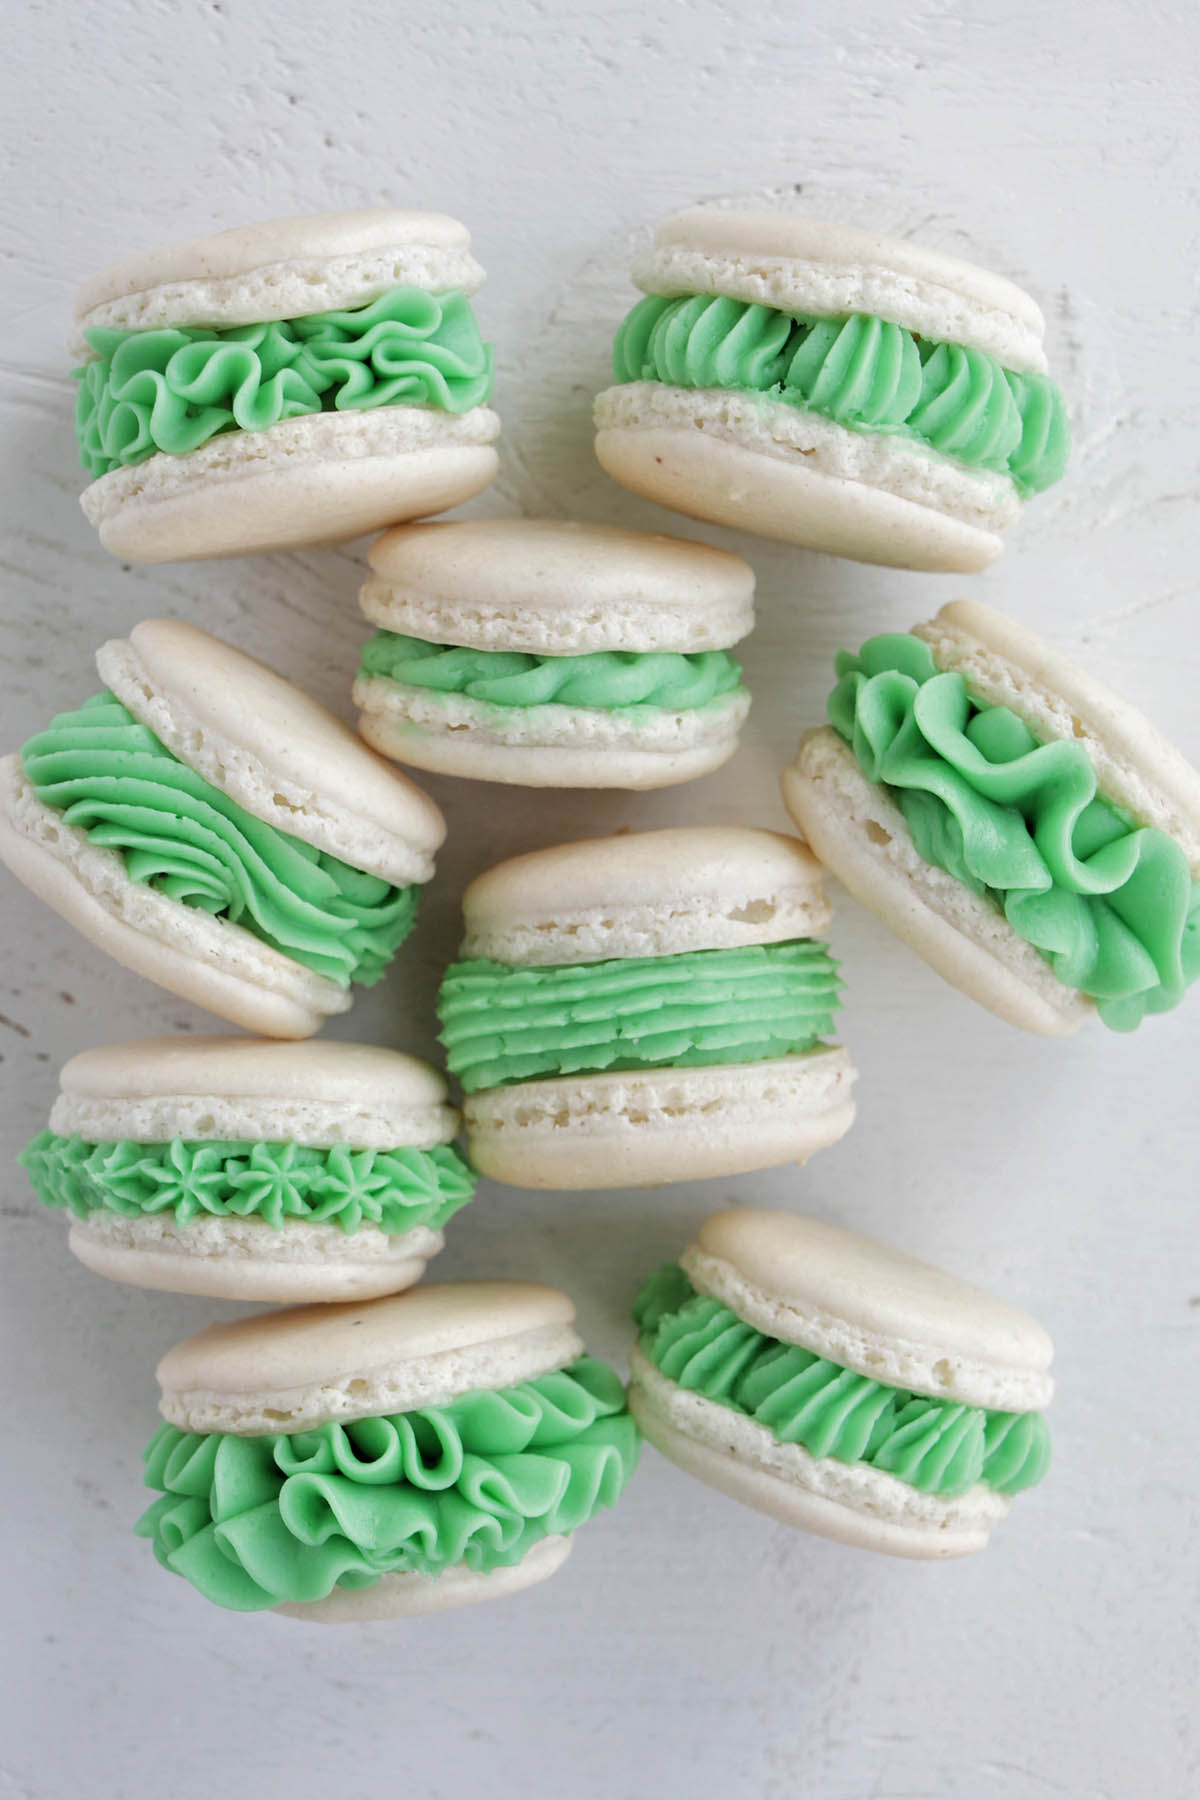 white macaron shells with light green frosting.